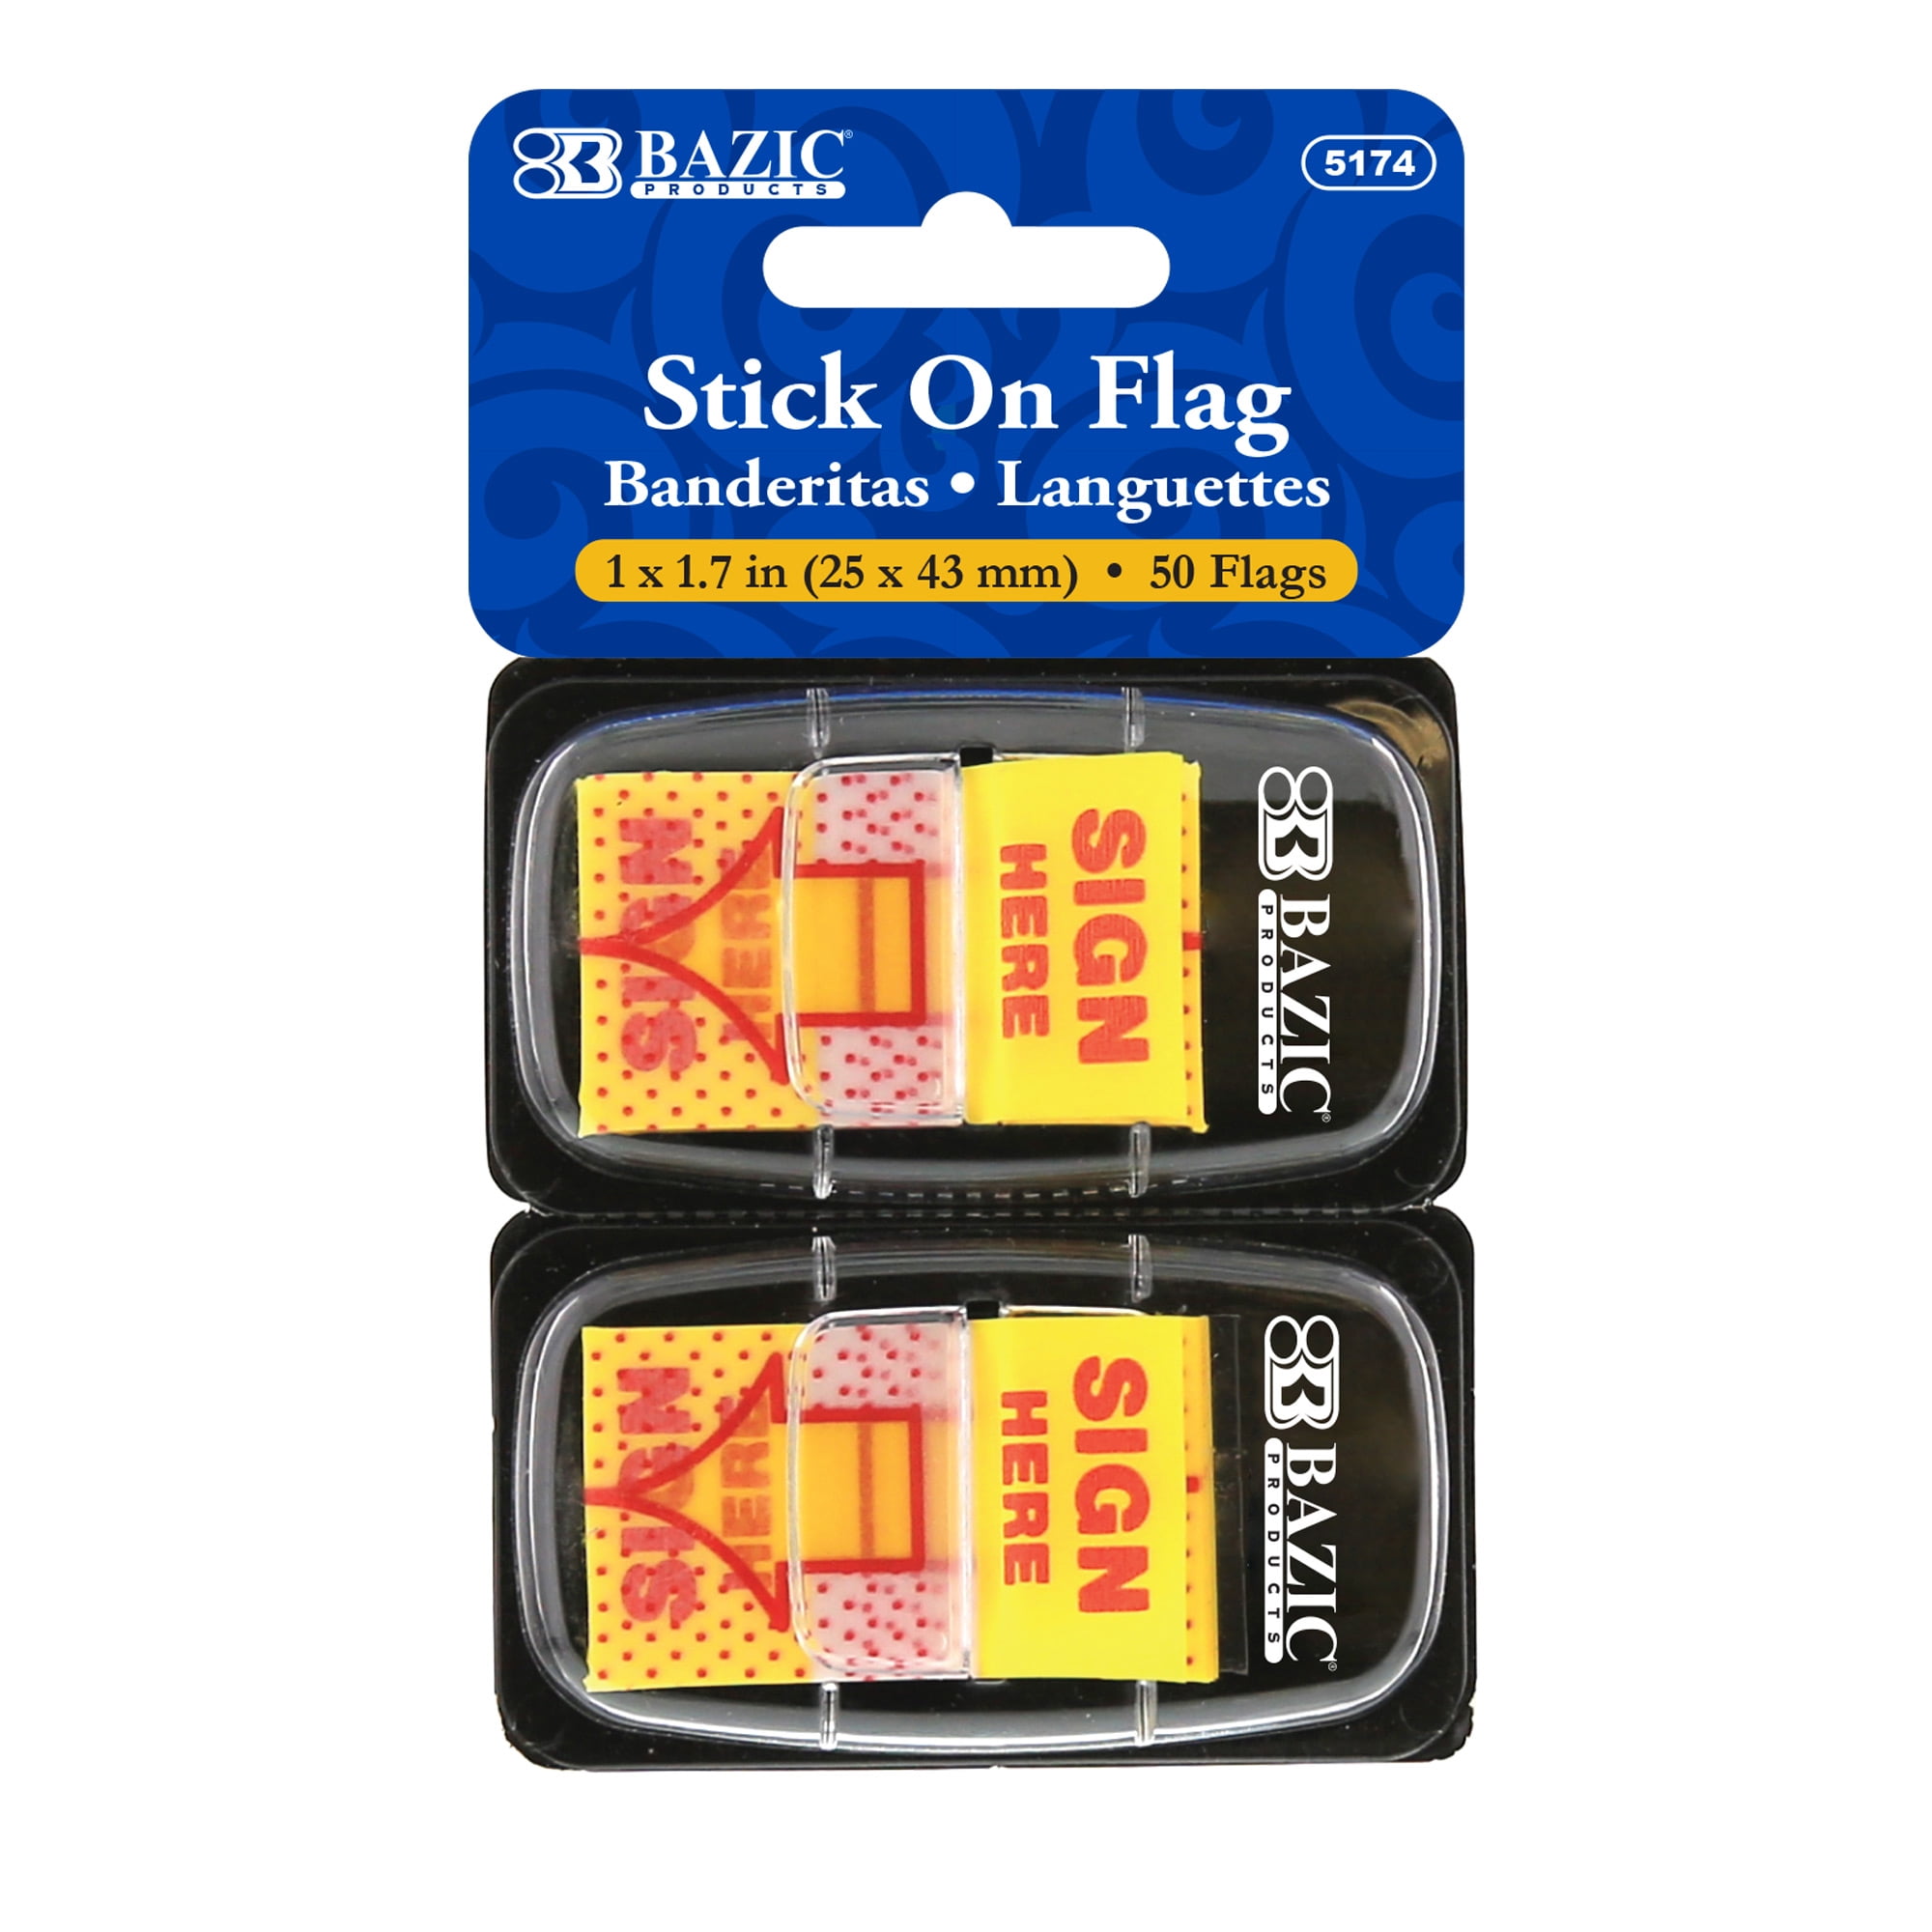 173X Self-Adhesive Chalkboard Labels With 2X Erasable Chalk Markers.  Perfect Label Partner For Kitchen Spice Jars, Jams Etc. Reusable Waterproof